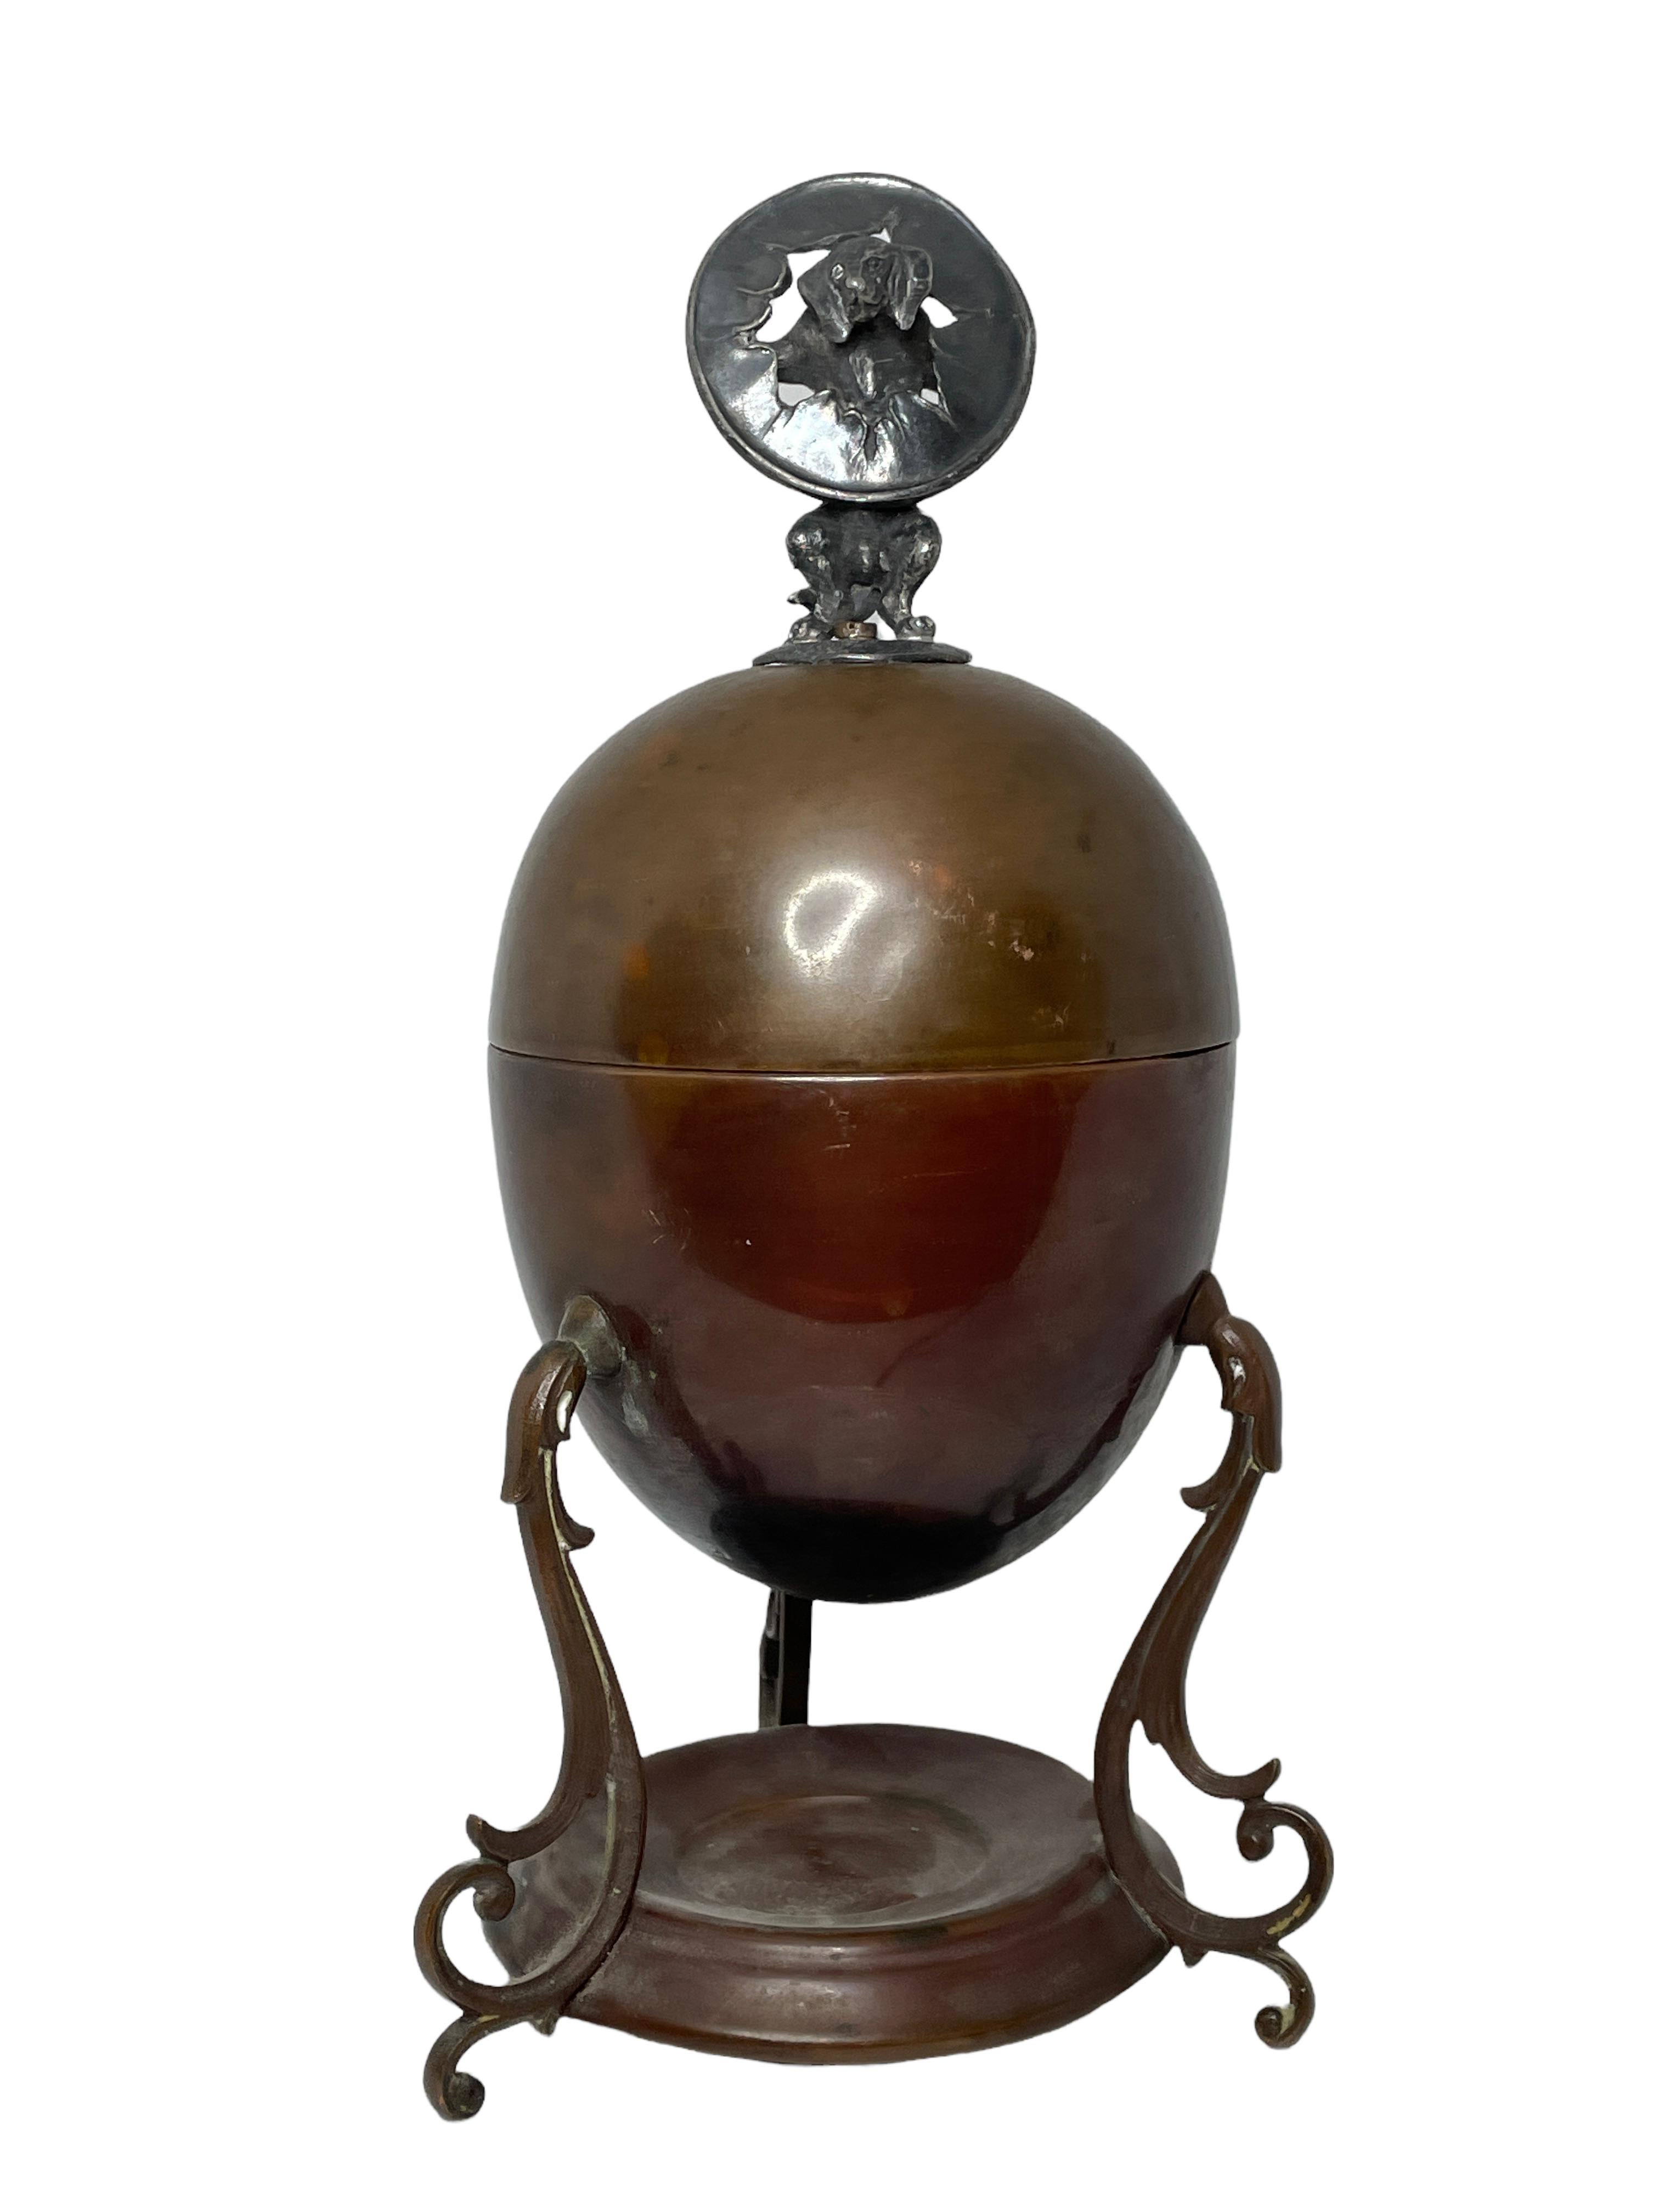 This is a lovely example of how the Victorians had a piece of kit for just about everything.

This is an egg coddler, or egg boiler. Something that would grace an elegant breakfast table.

Consisting of a two part egg shaped container on 3